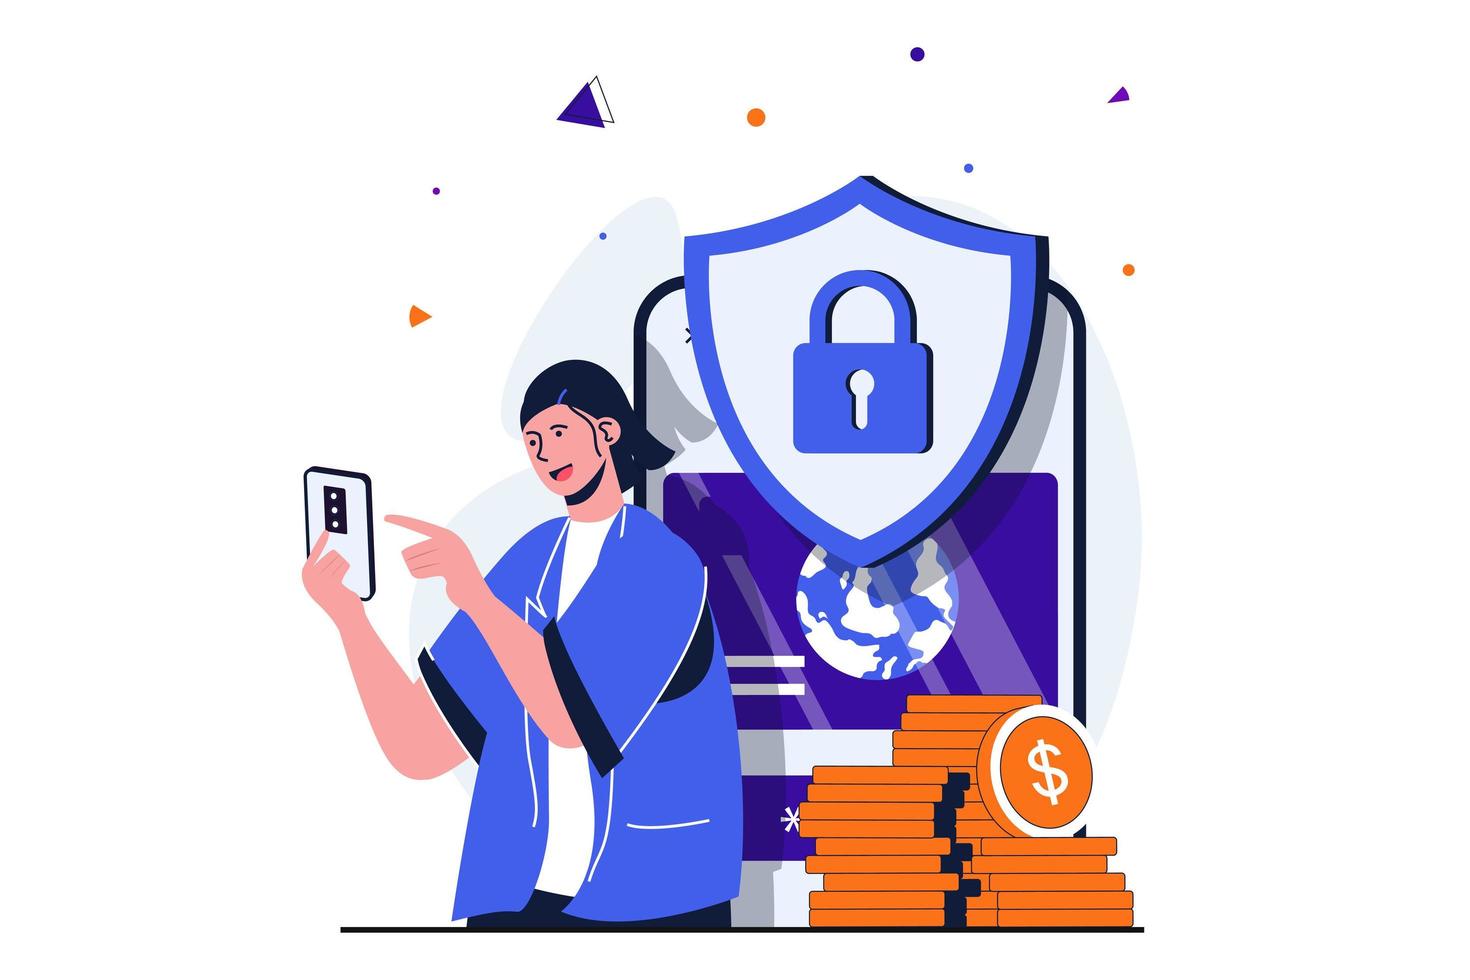 Secure payment modern flat concept for web banner design. Woman uses protect mobile application for online banking and keeps her money in account. Vector illustration with isolated people scene